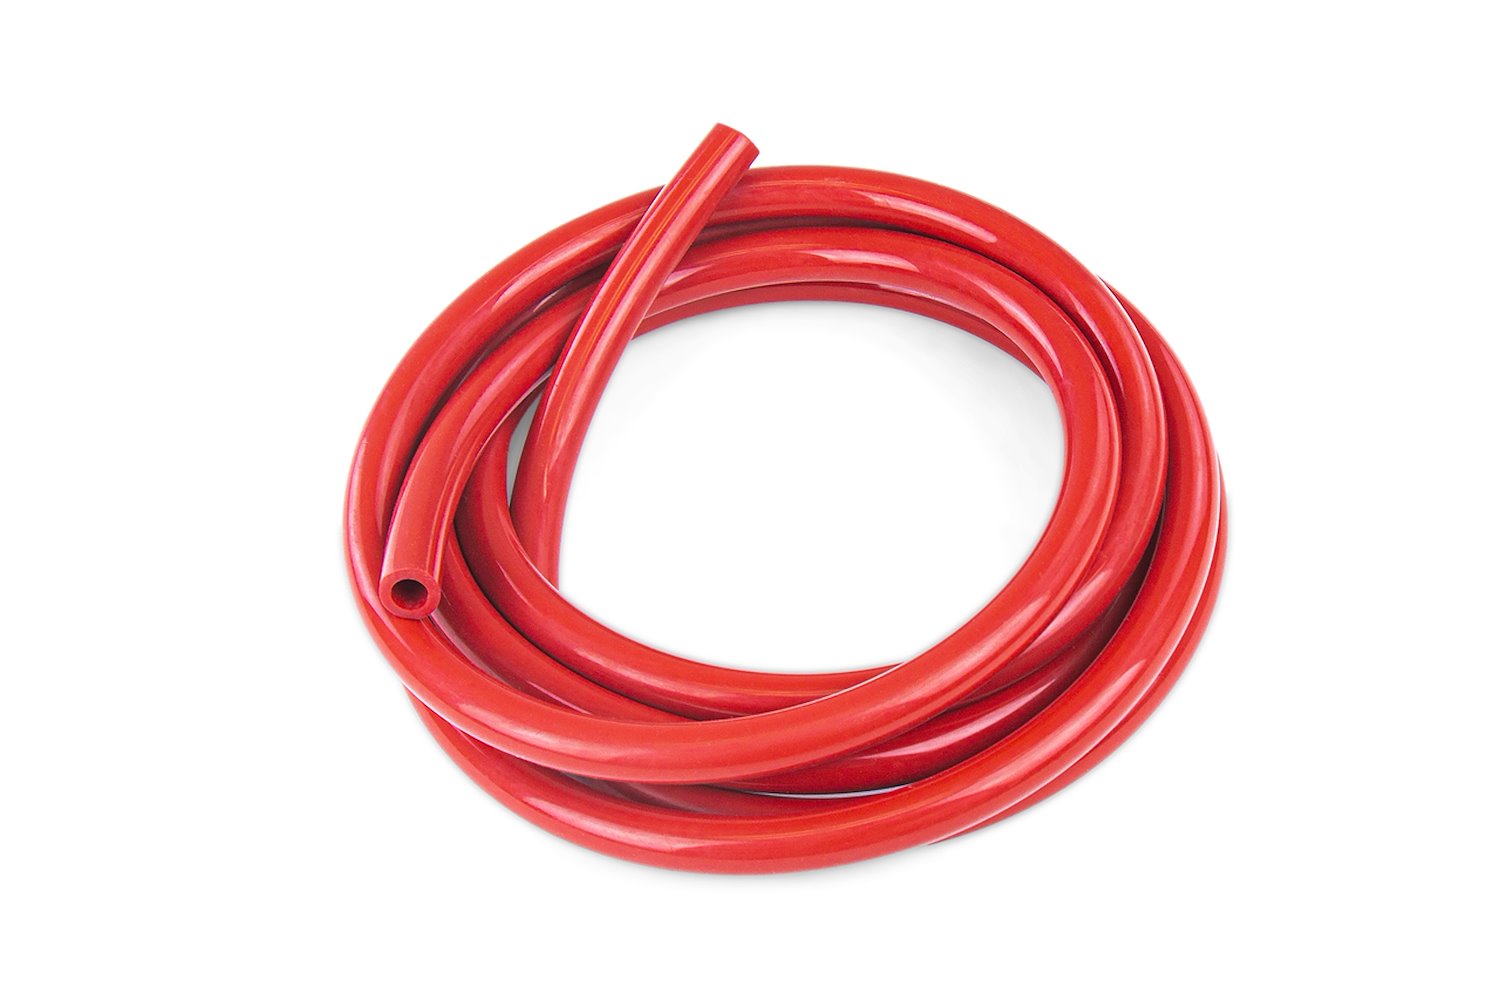 HTSVH8-REDx10 High-Temperature Silicone Vacuum Hose Tubing, 5/16 in. ID, 10 ft. Roll, Red